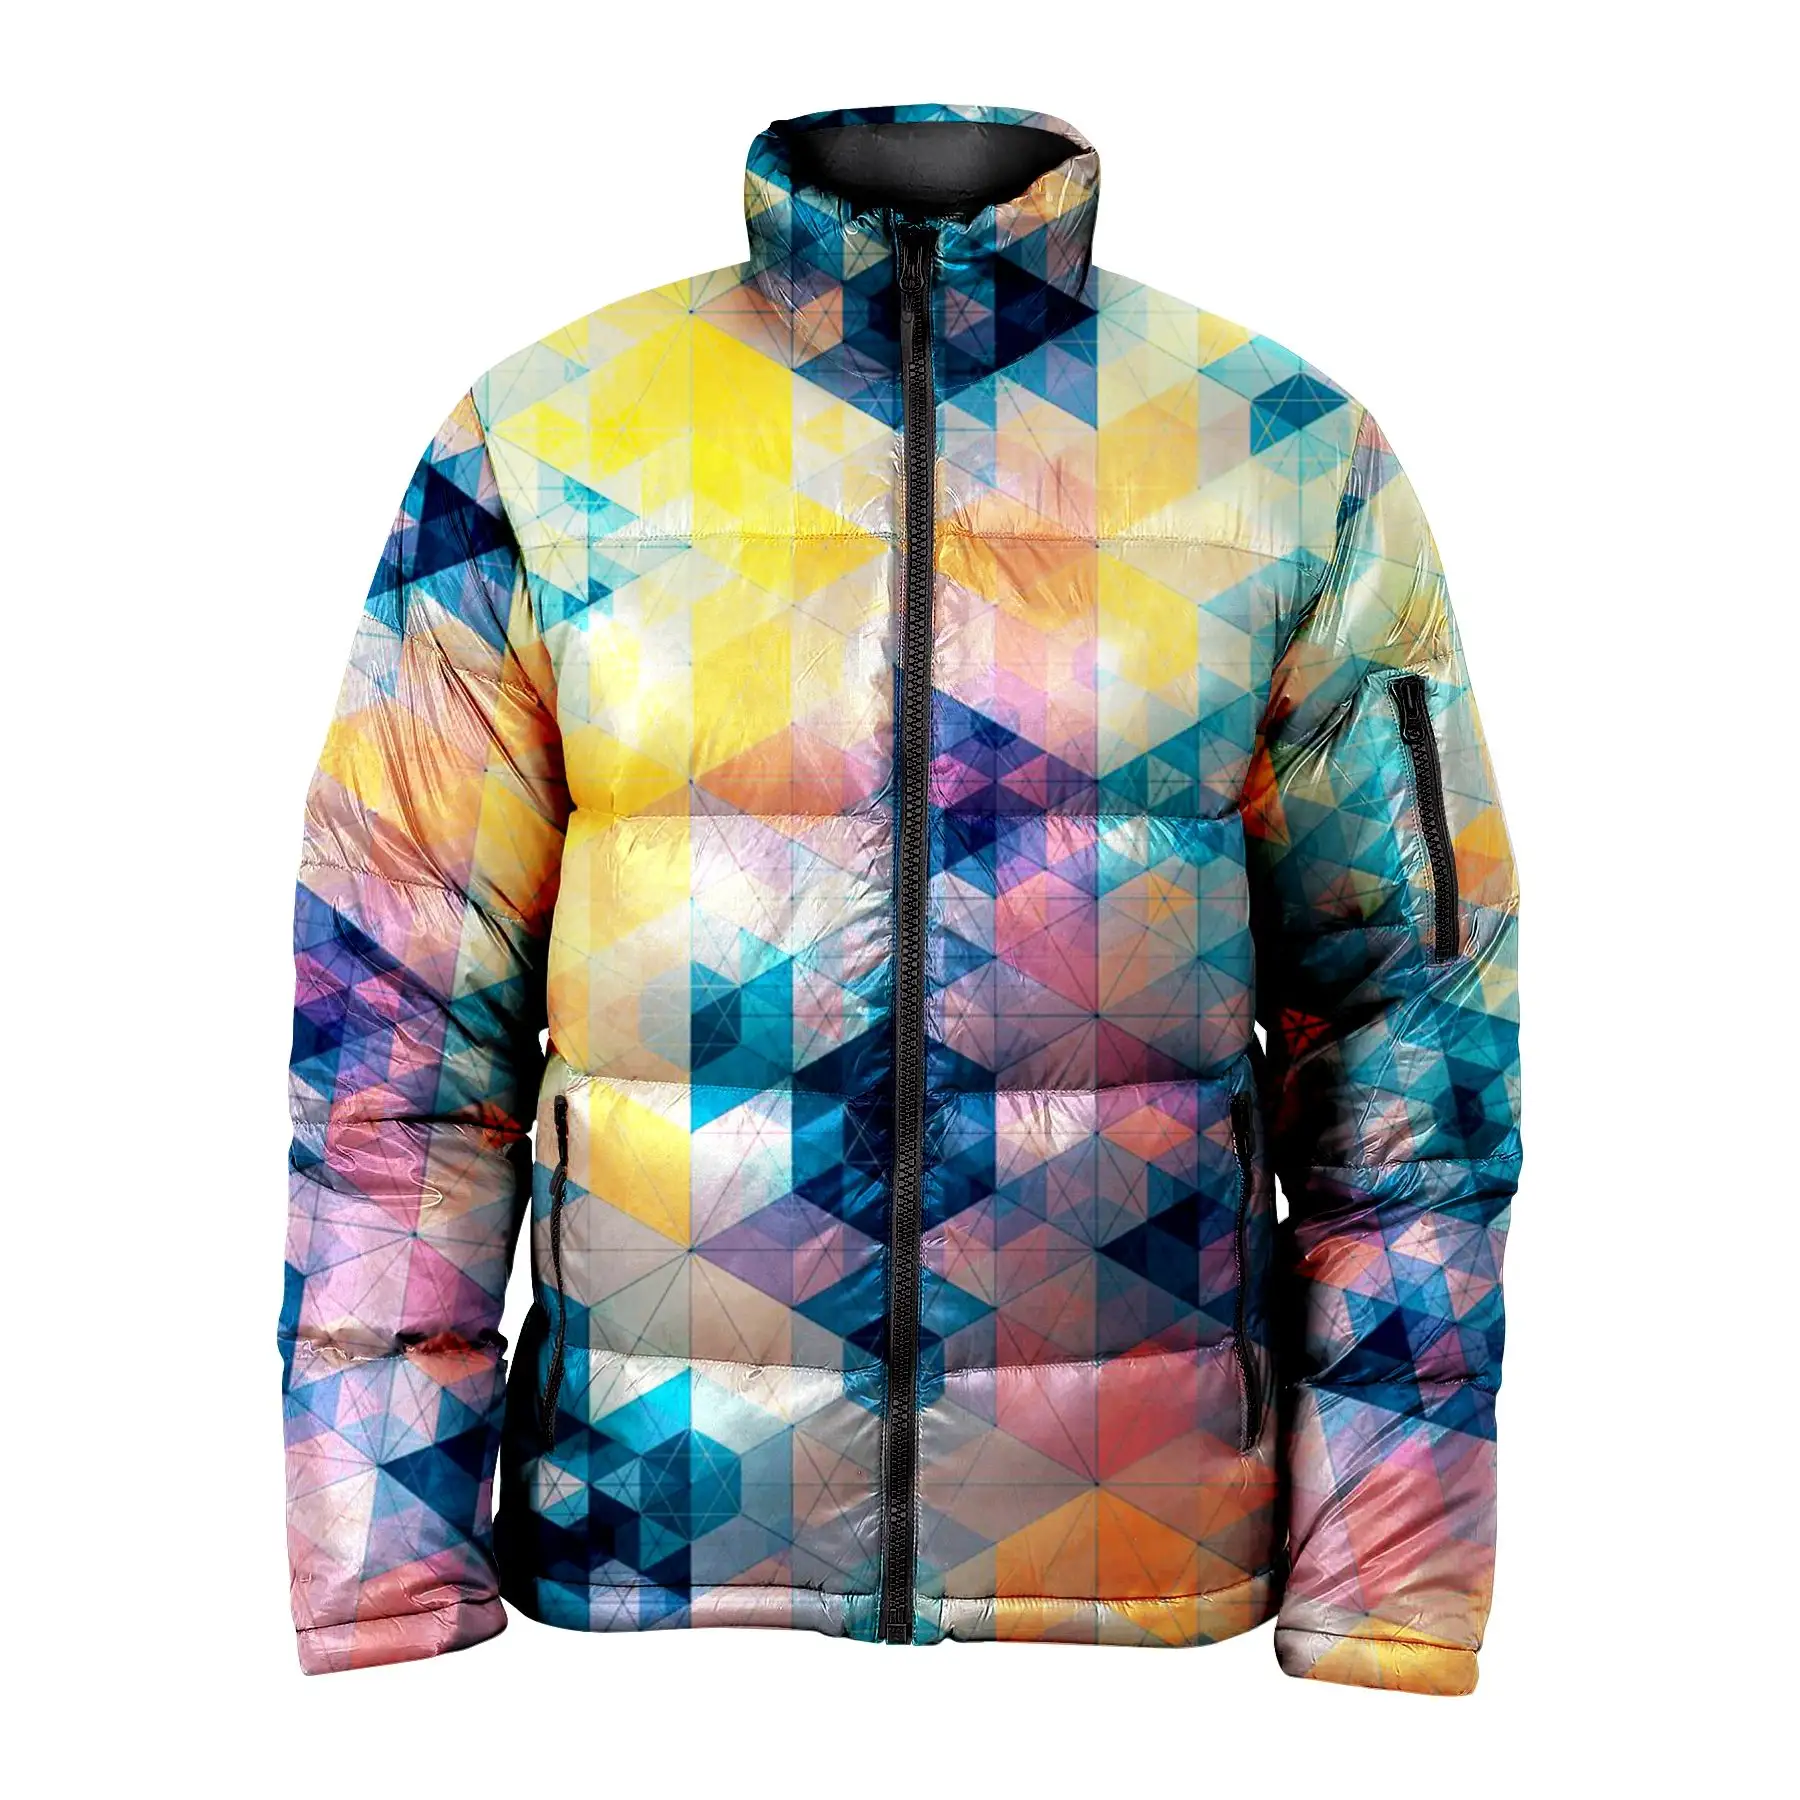 View larger image Add to Compare Share wholesale customize men's sublimation multi colors smoke front puffer jacket puffer ja